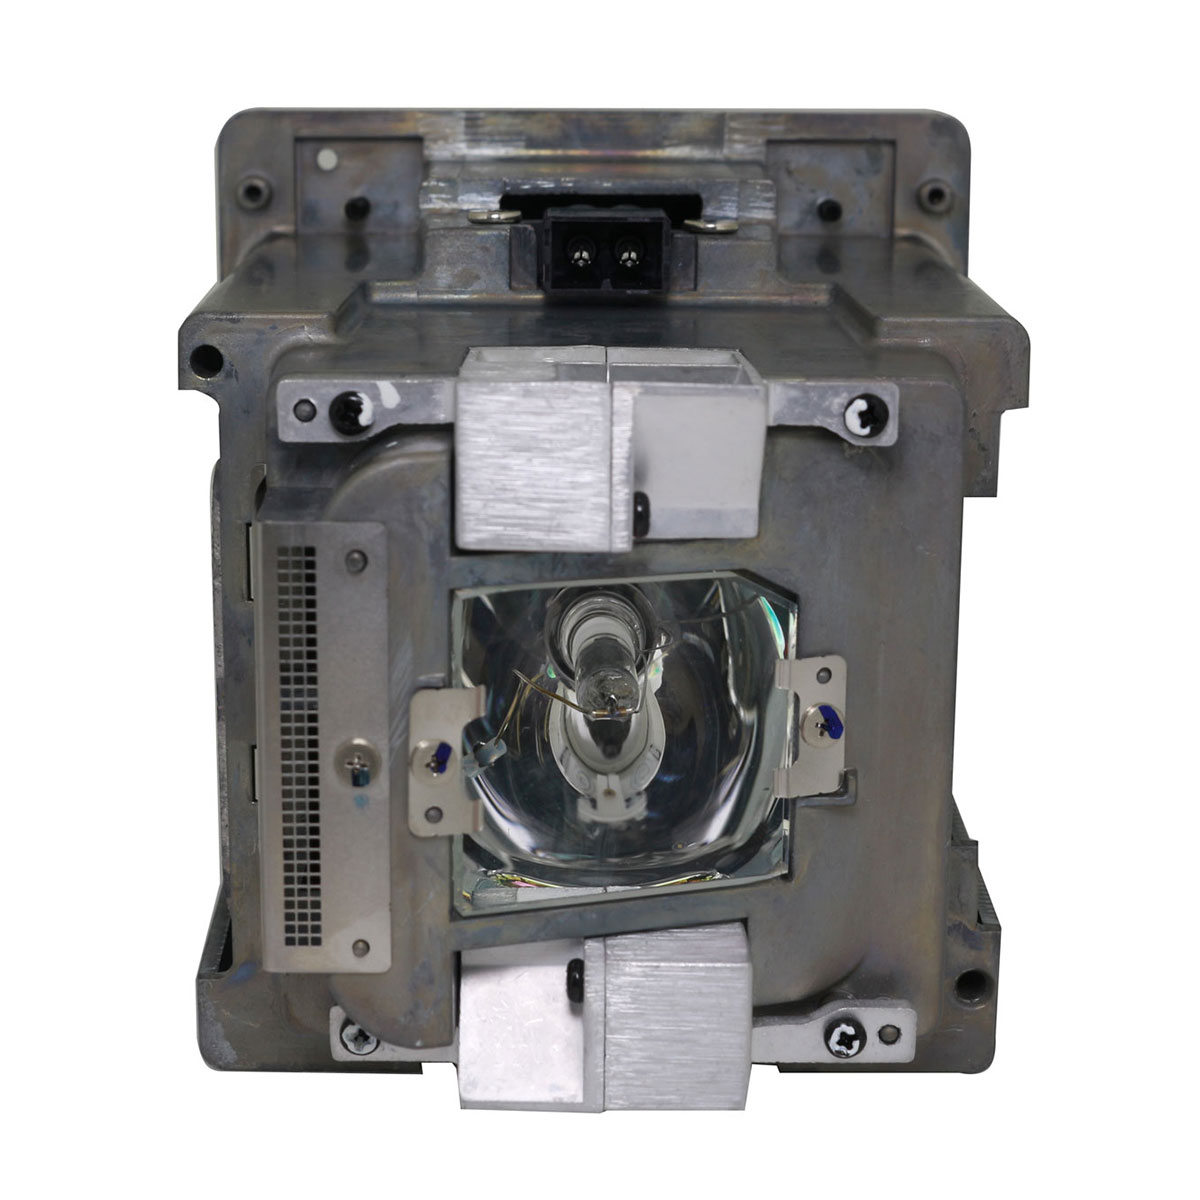 Original BL-FN465A Replacement Lamp & Housing for Optoma Projectors - image 4 of 7